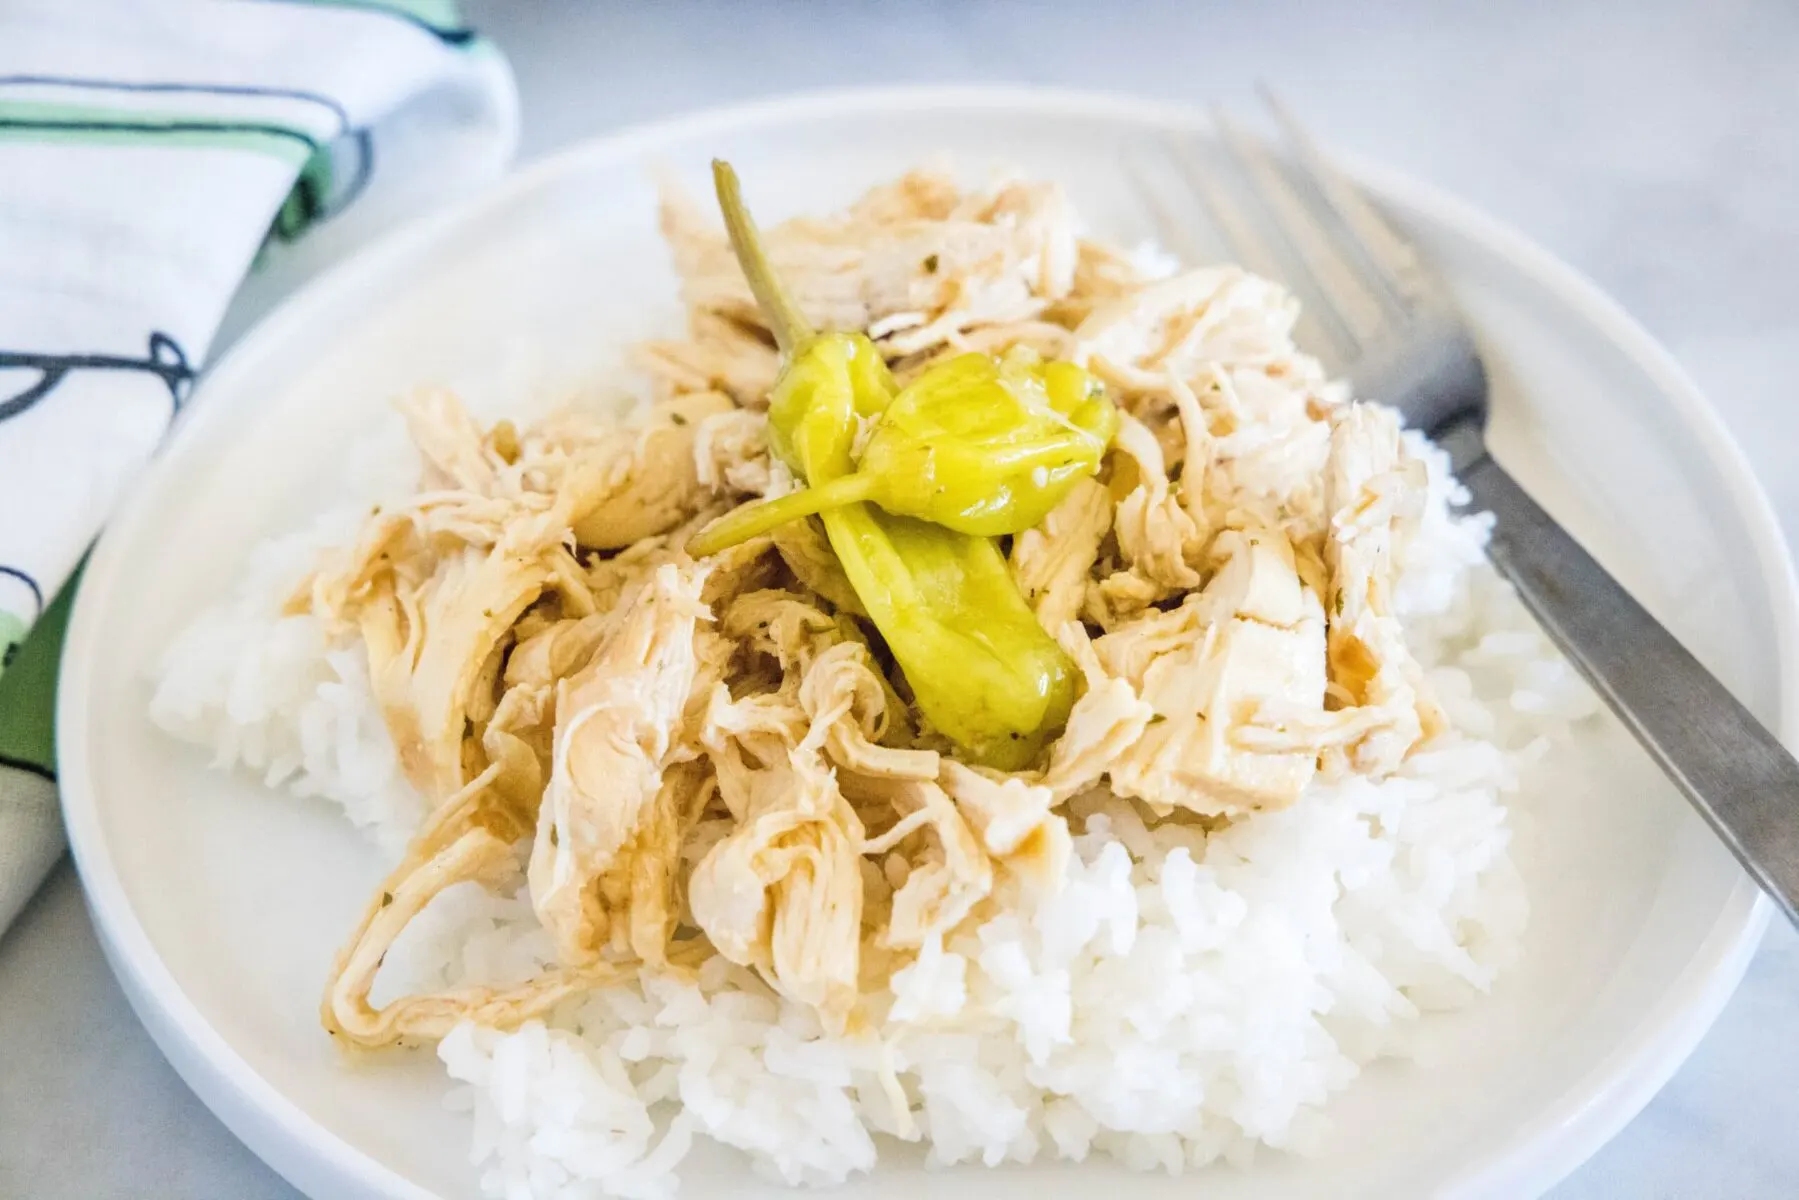 A plate with a fork and some rice, topped with shredded chicken and pepperoncini peppers, next to a kitchen towel